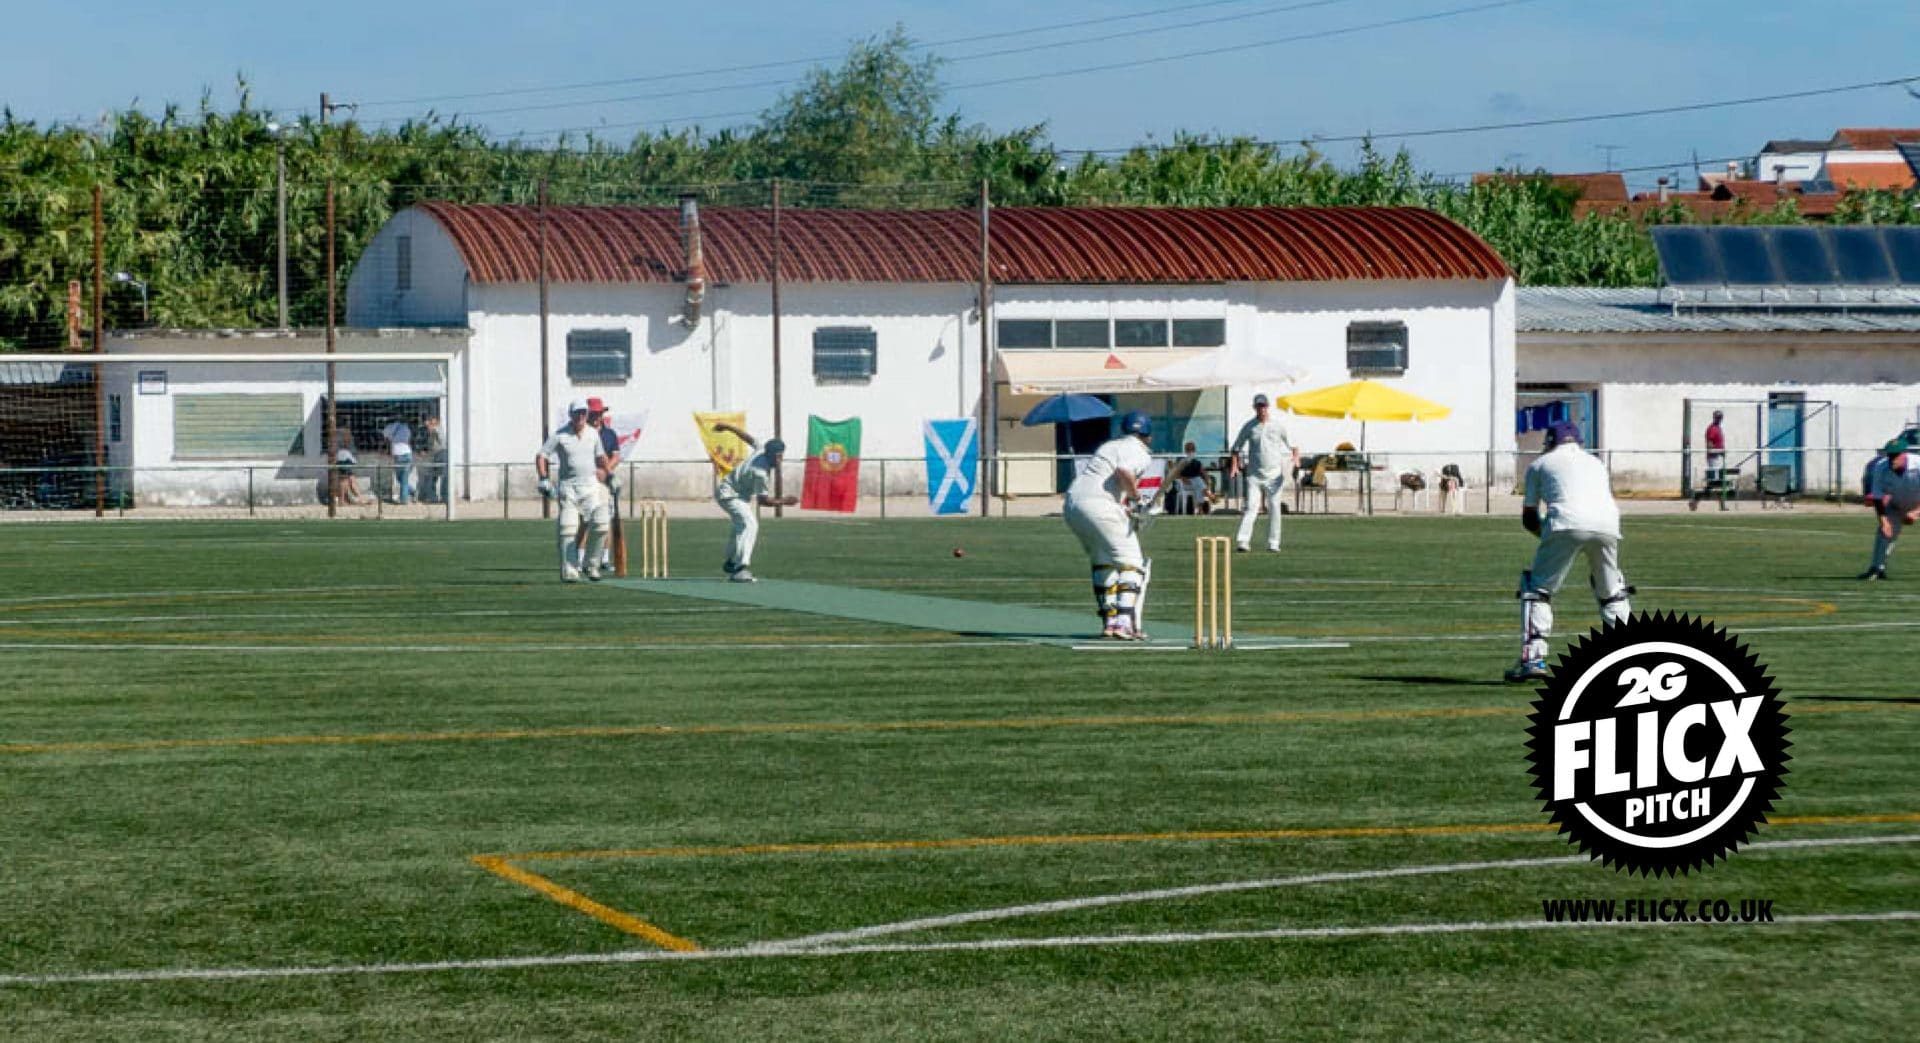 Cricket on an artificial pitch